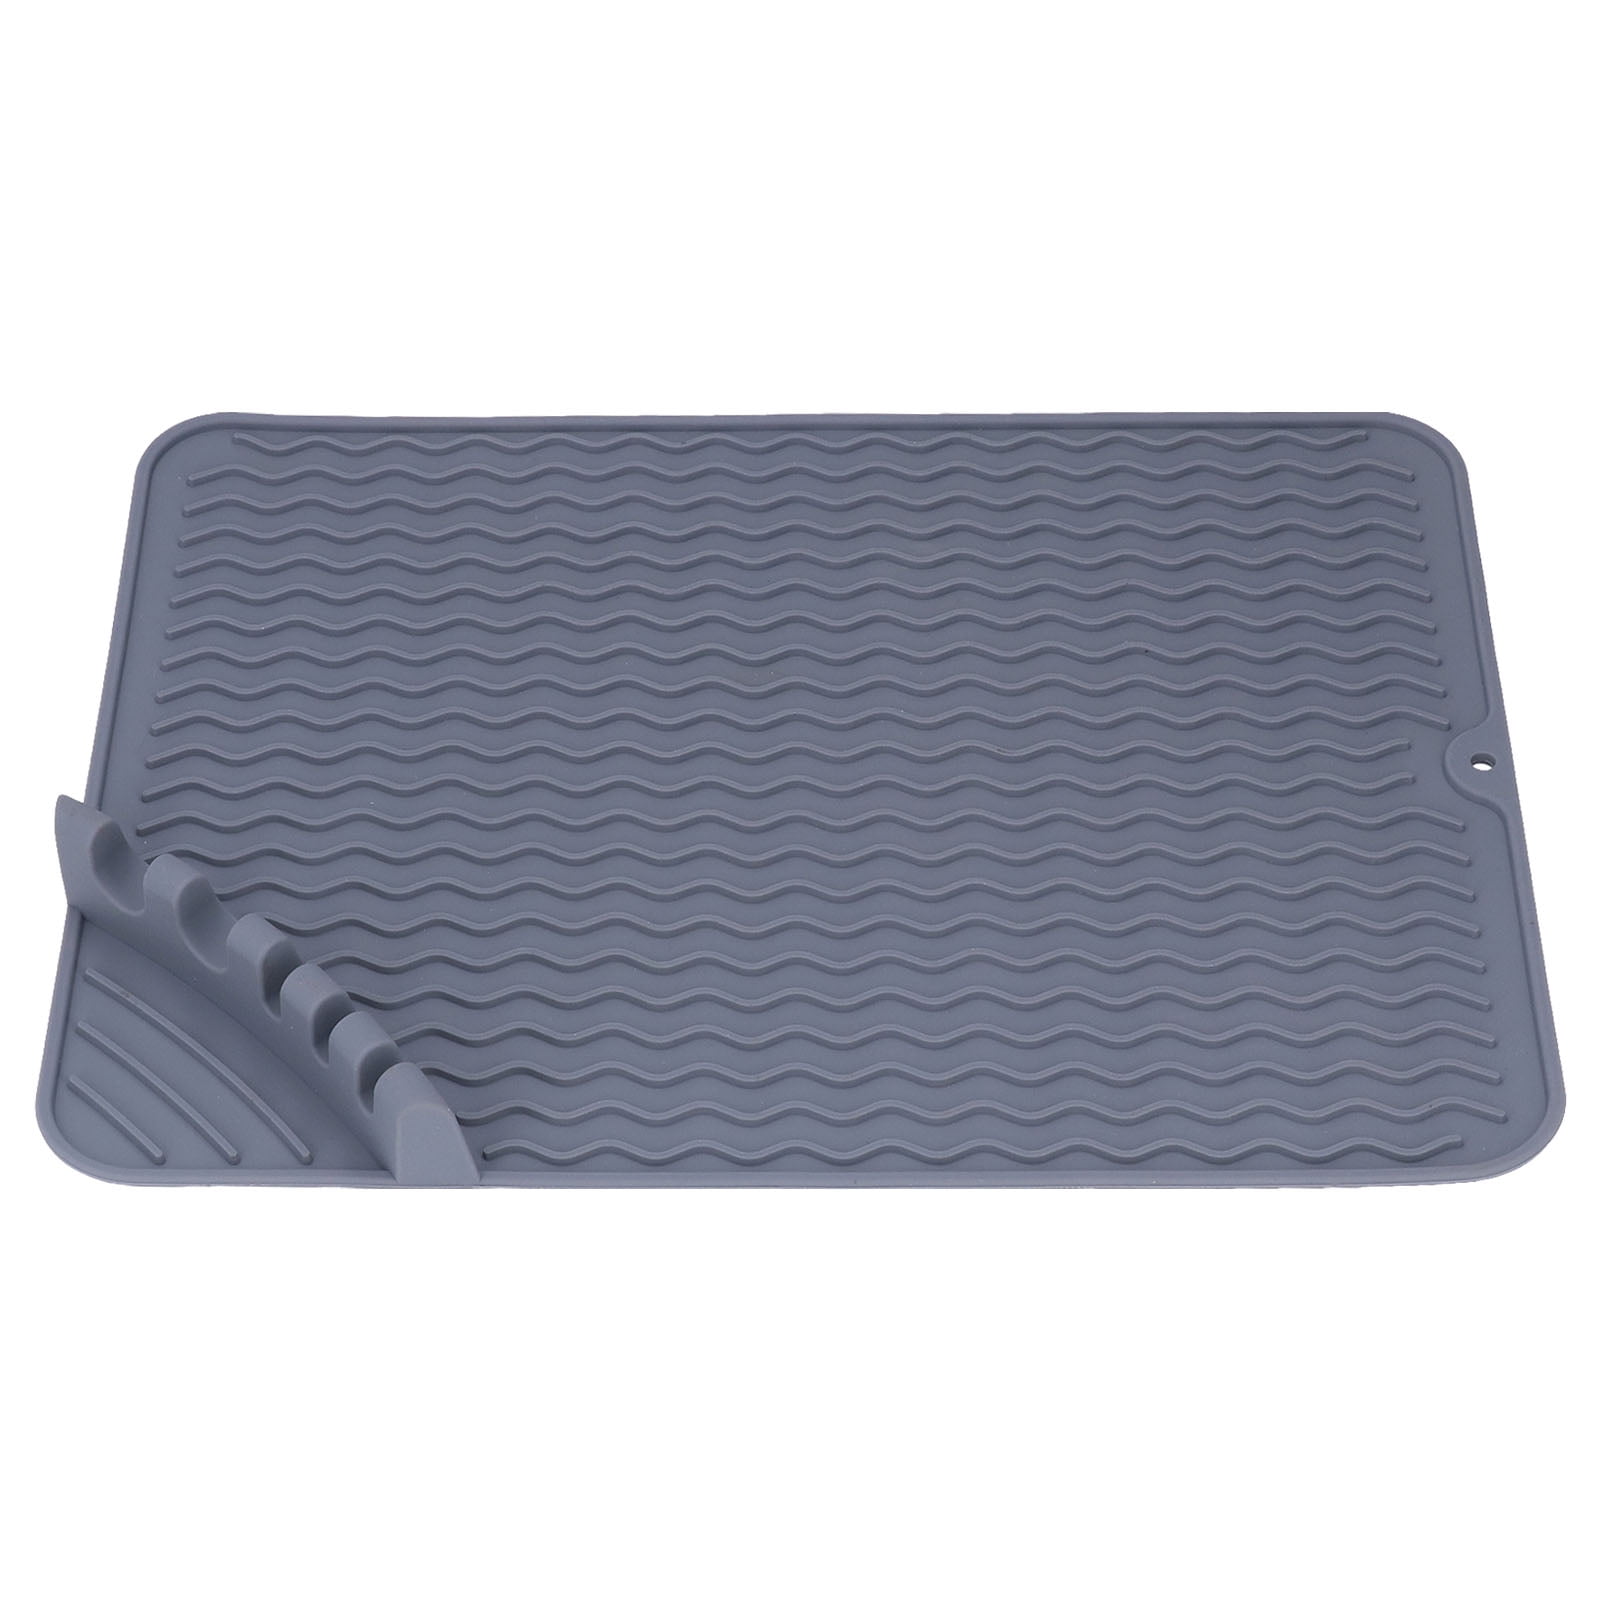 Haykey Silicone Drying Desk Mat,Easy Clean,Kitchen Mat for Counter